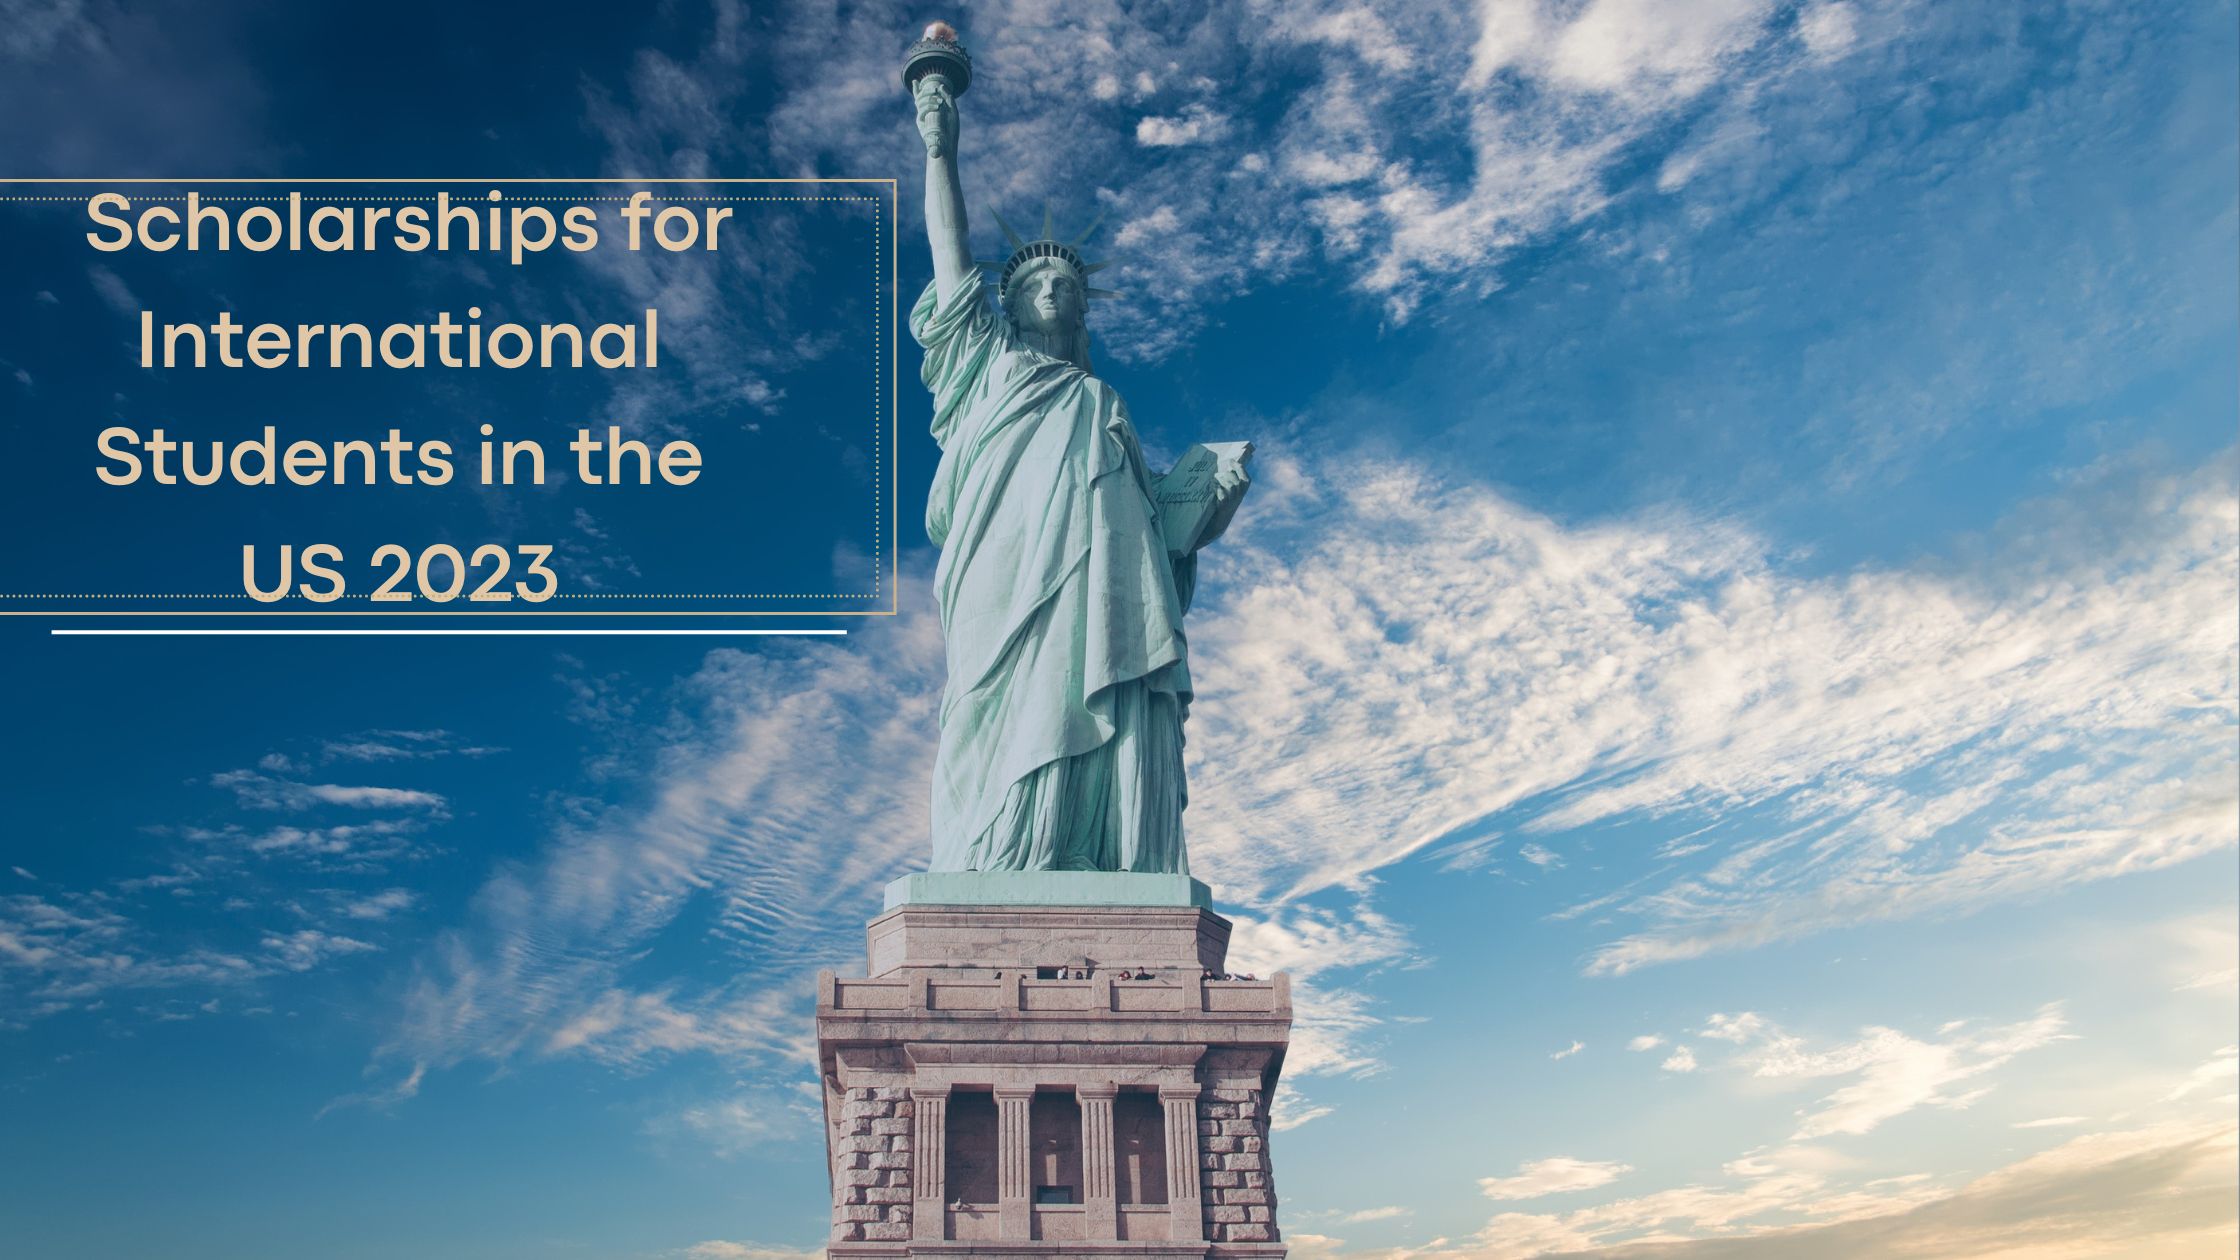 Scholarships for International Students in the US 2023